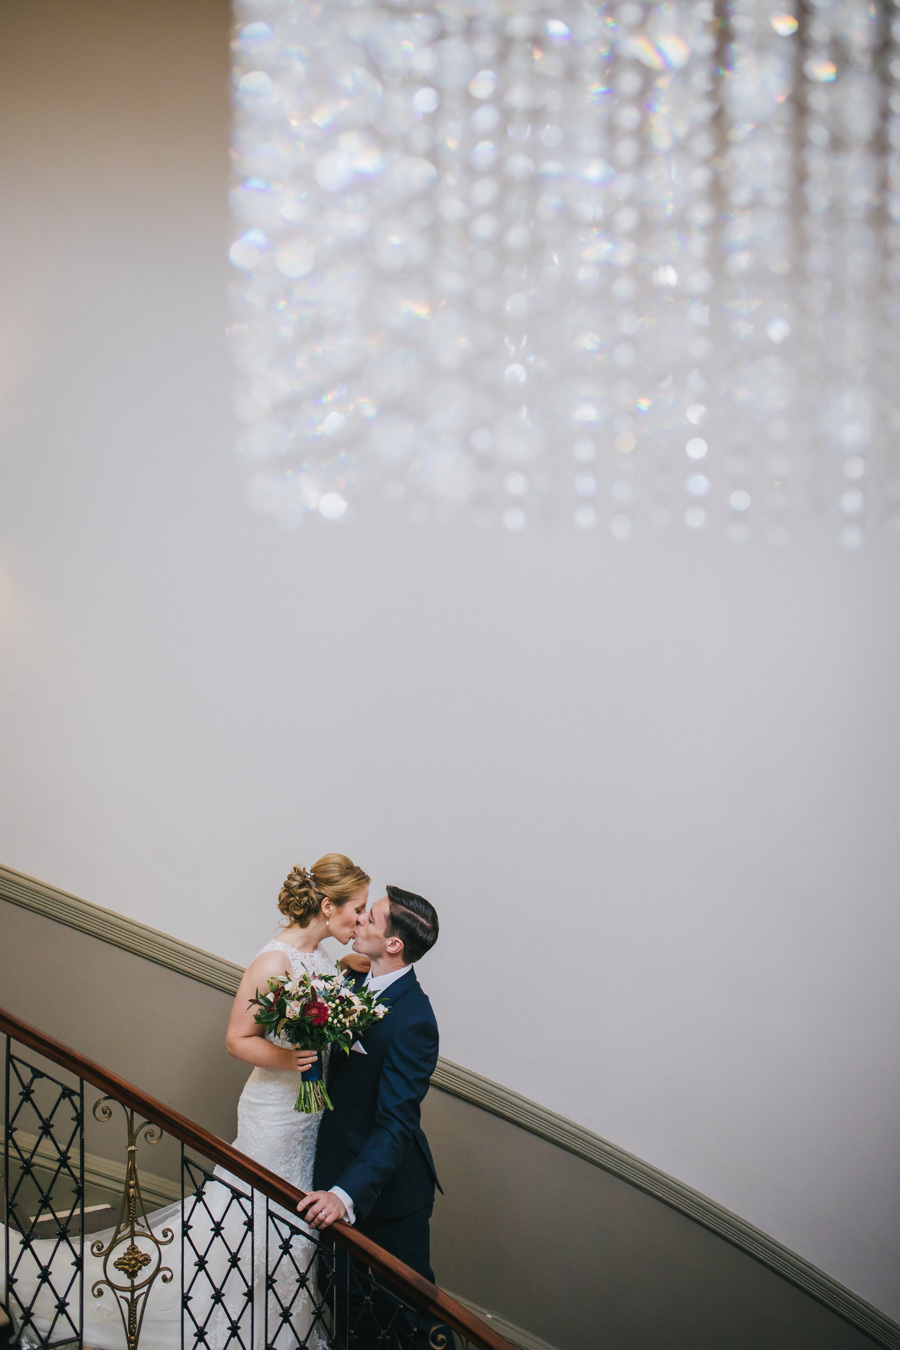 Kat and Vincent’s Roundhay Park wedding, with Amy Jordison Photography